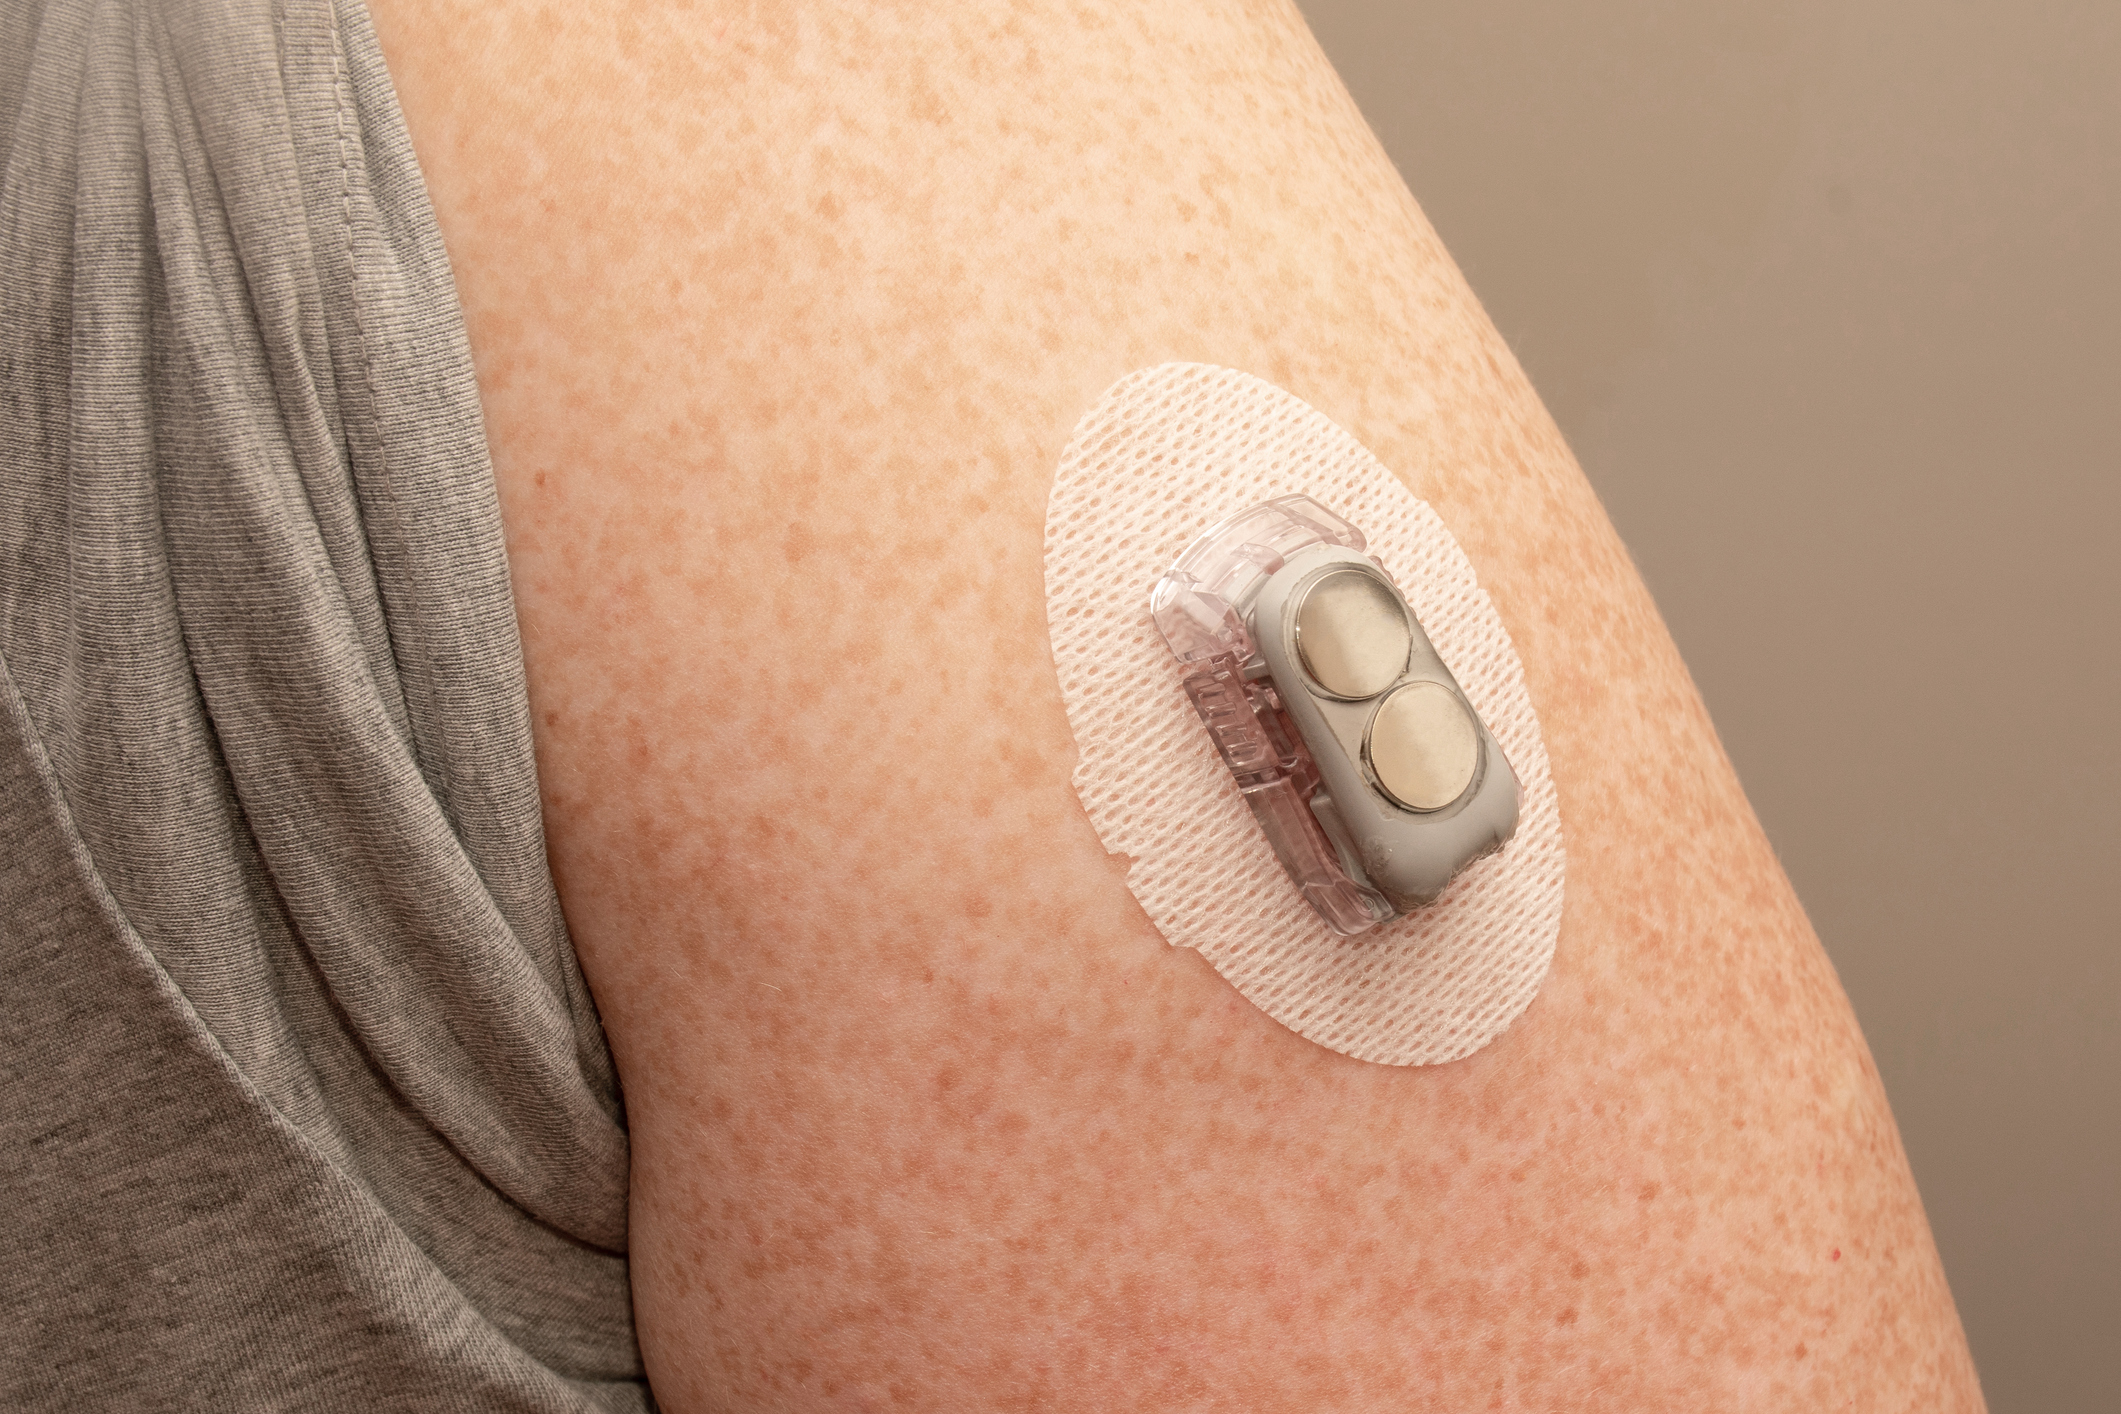 CGM - Continuous glucose monitoring: senso installed on the upper arm. Transmitter with replaced batteries